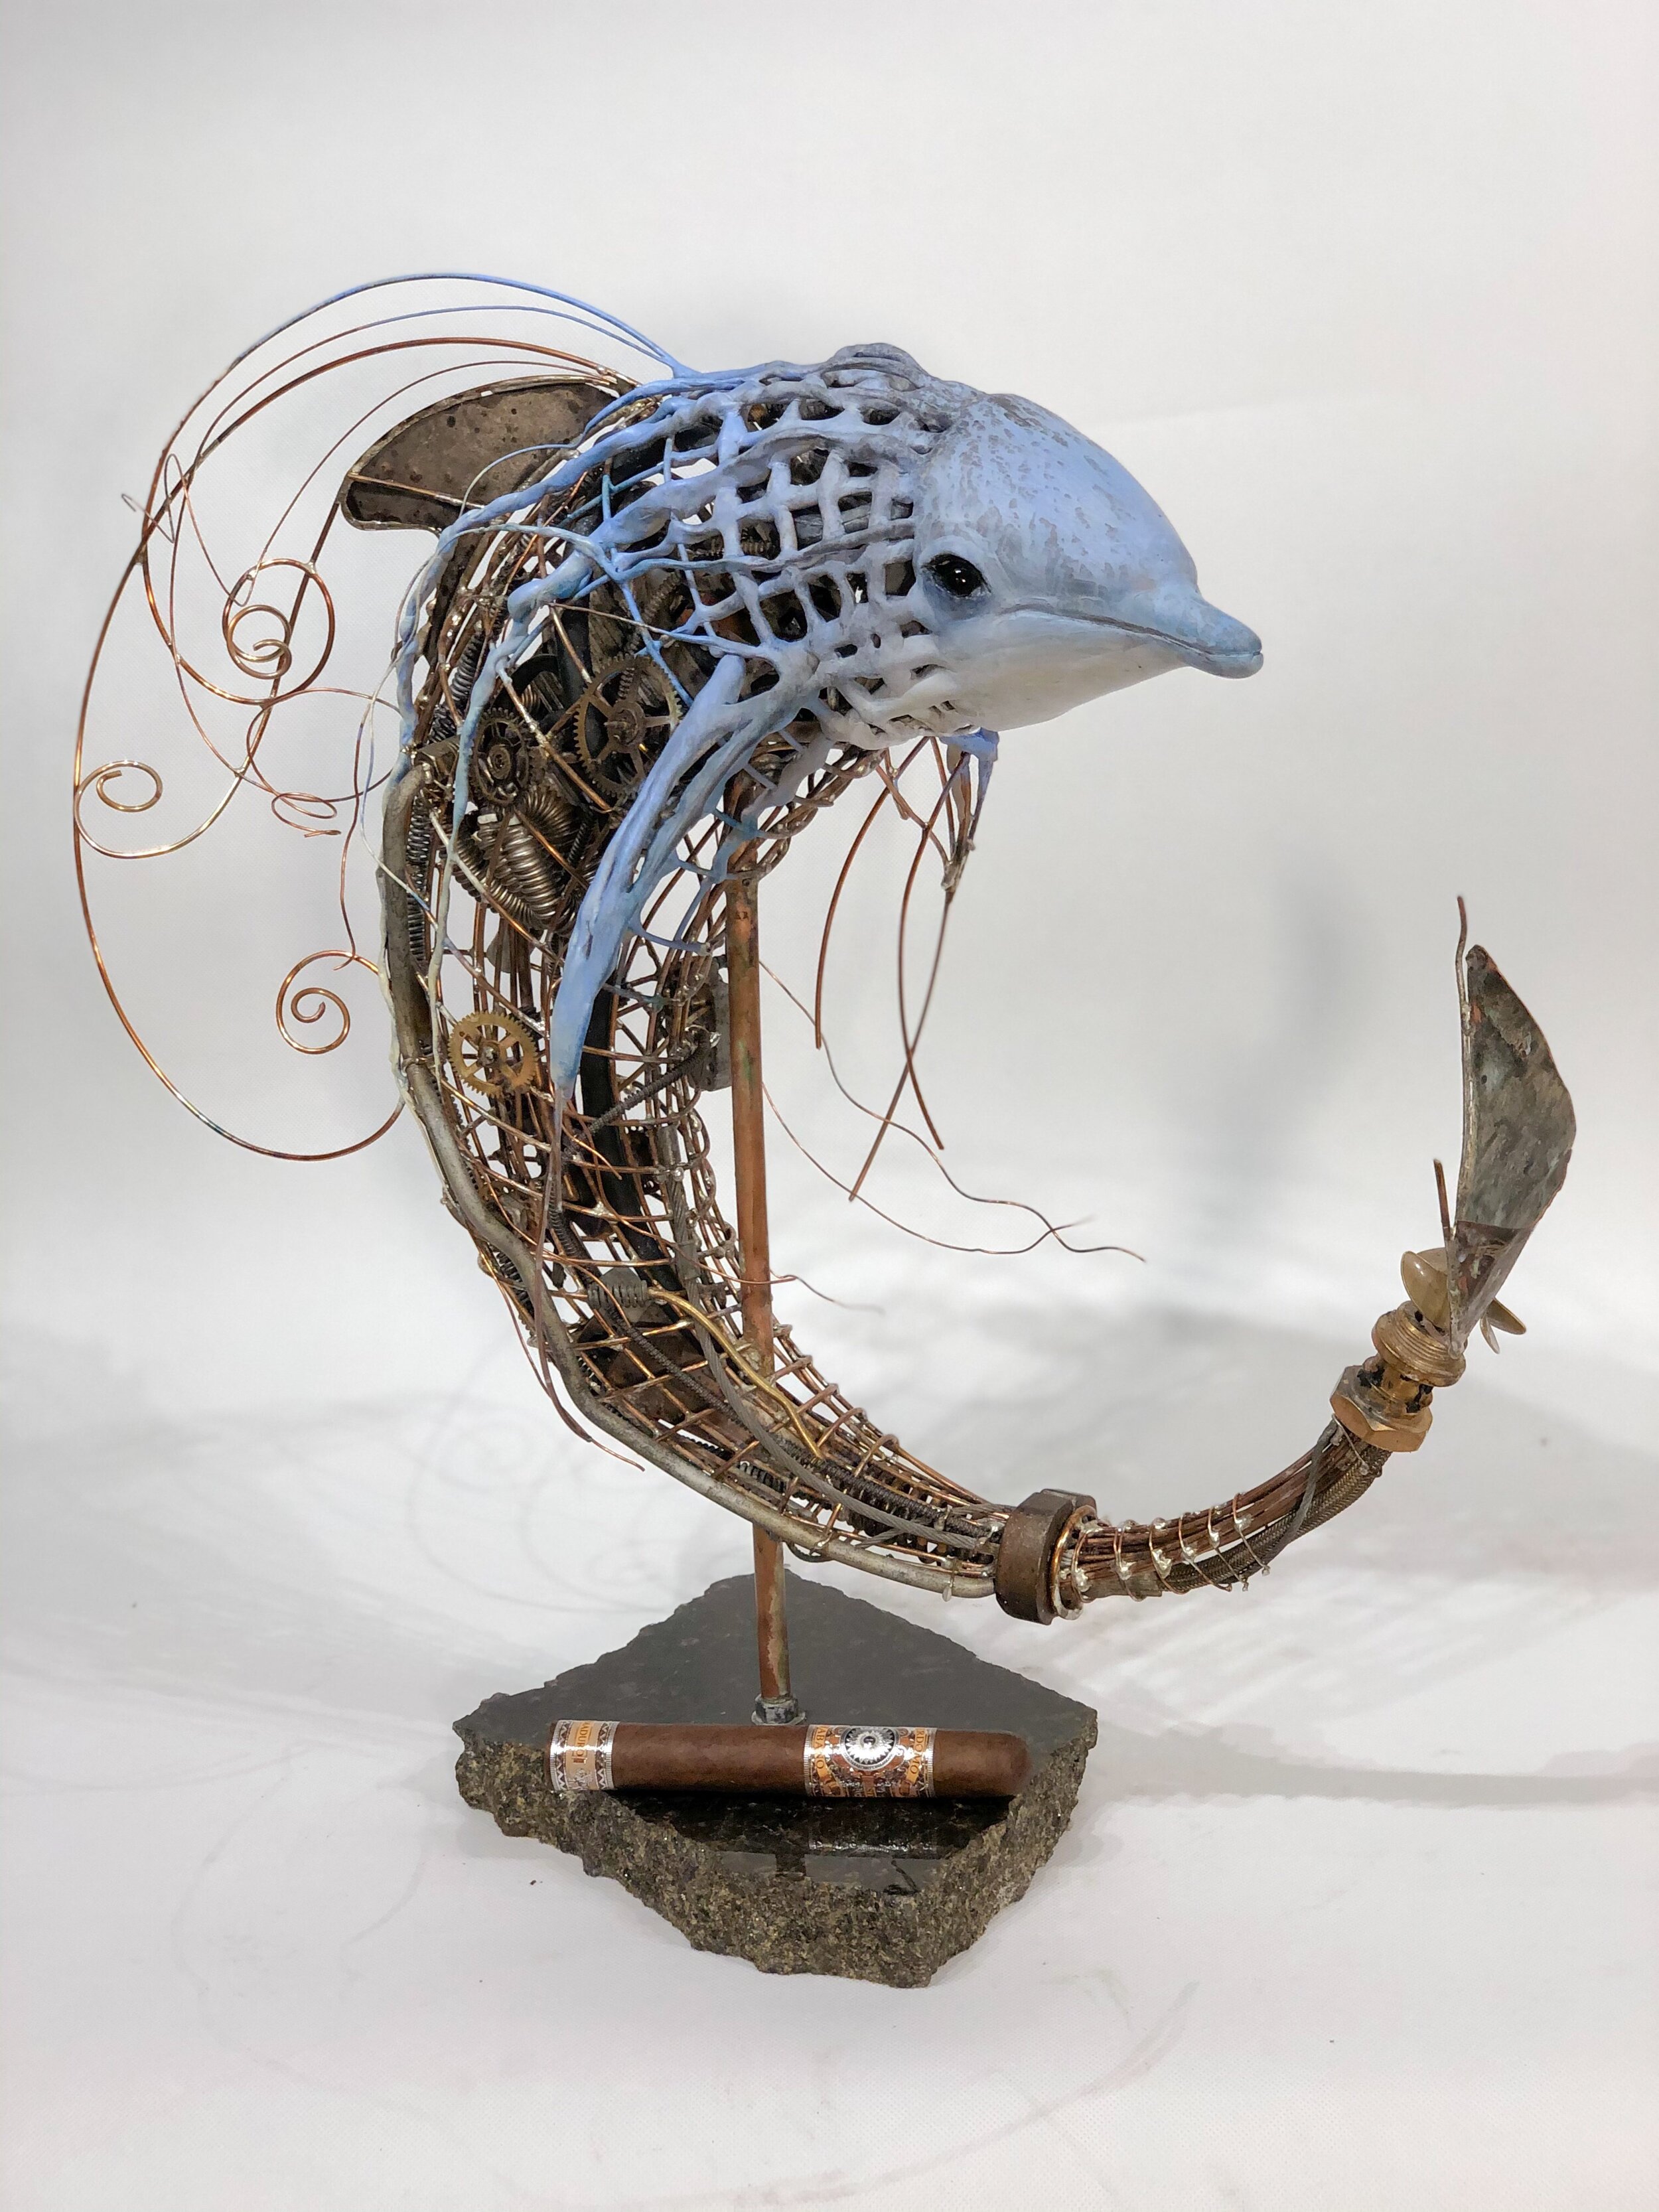    Dolphin  , 19” x 10” x 19”, found objects and clay 